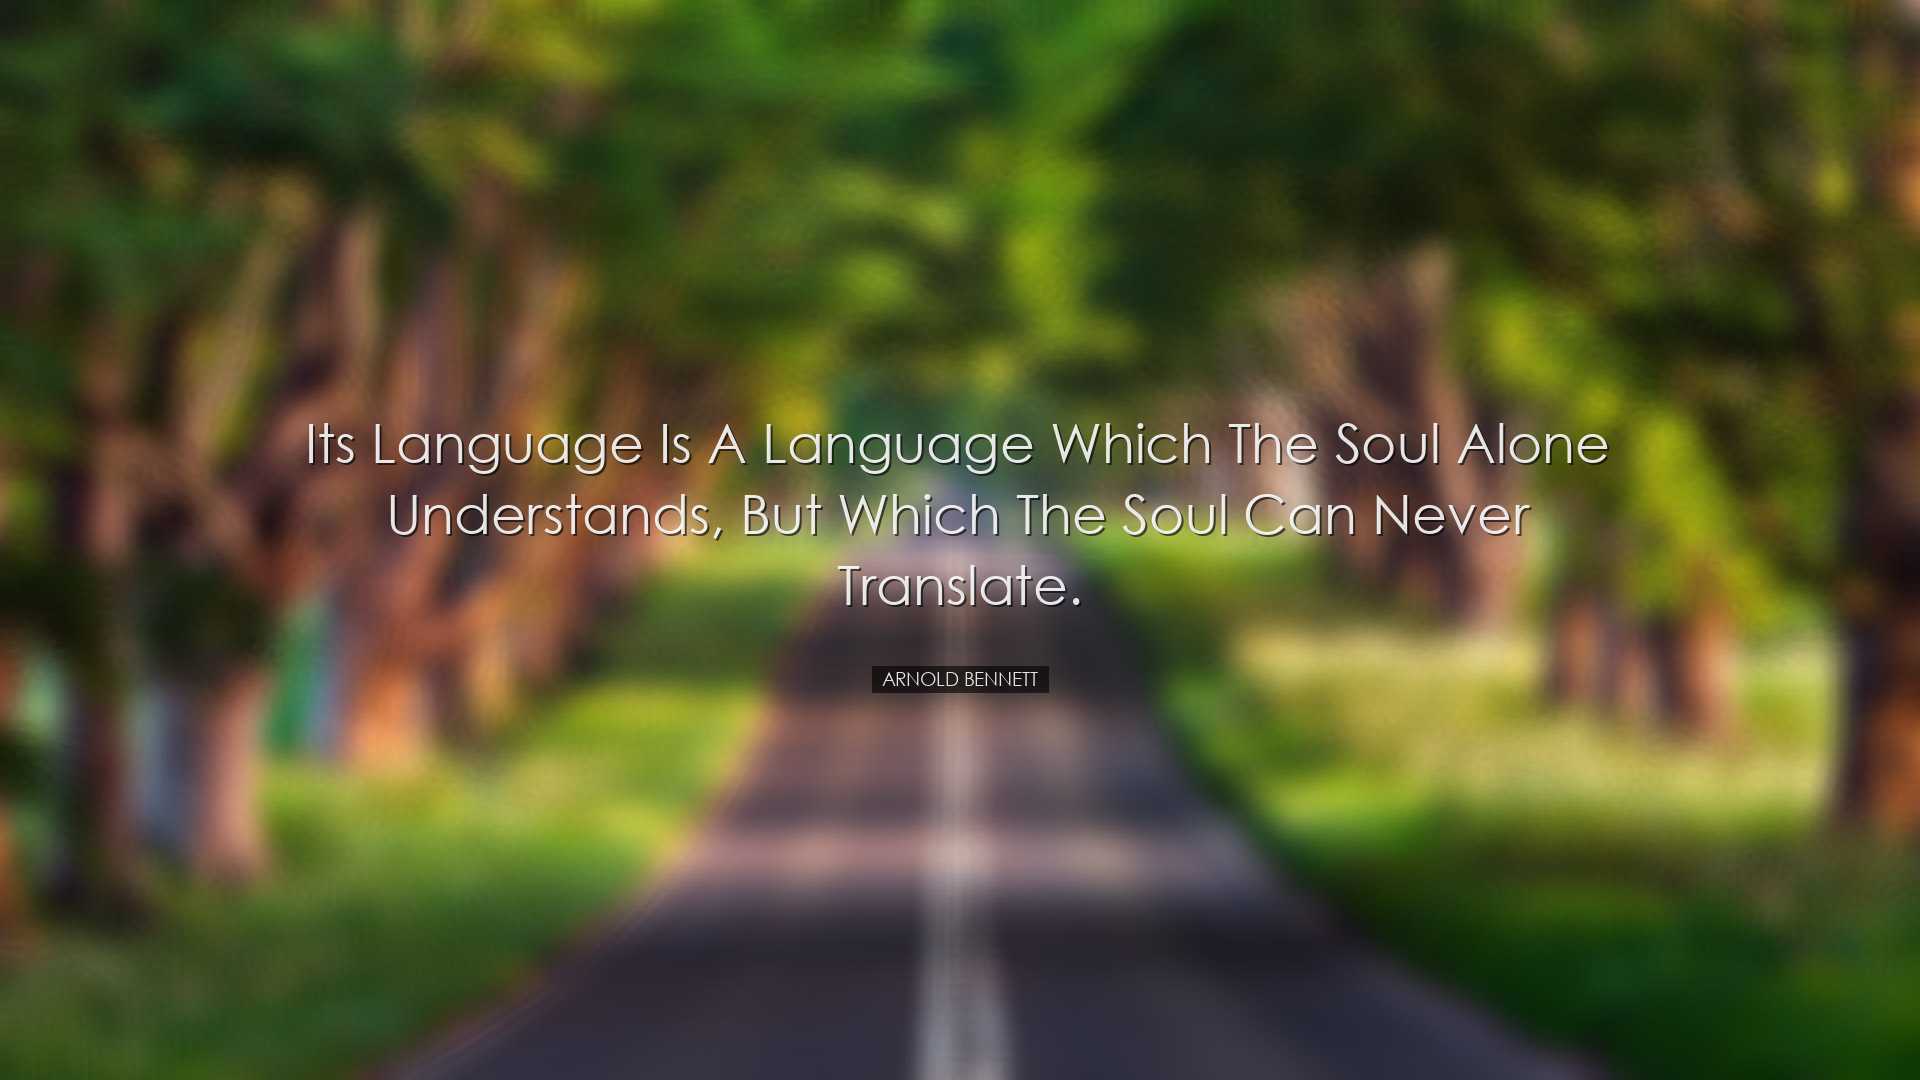 Its language is a language which the soul alone understands, but w